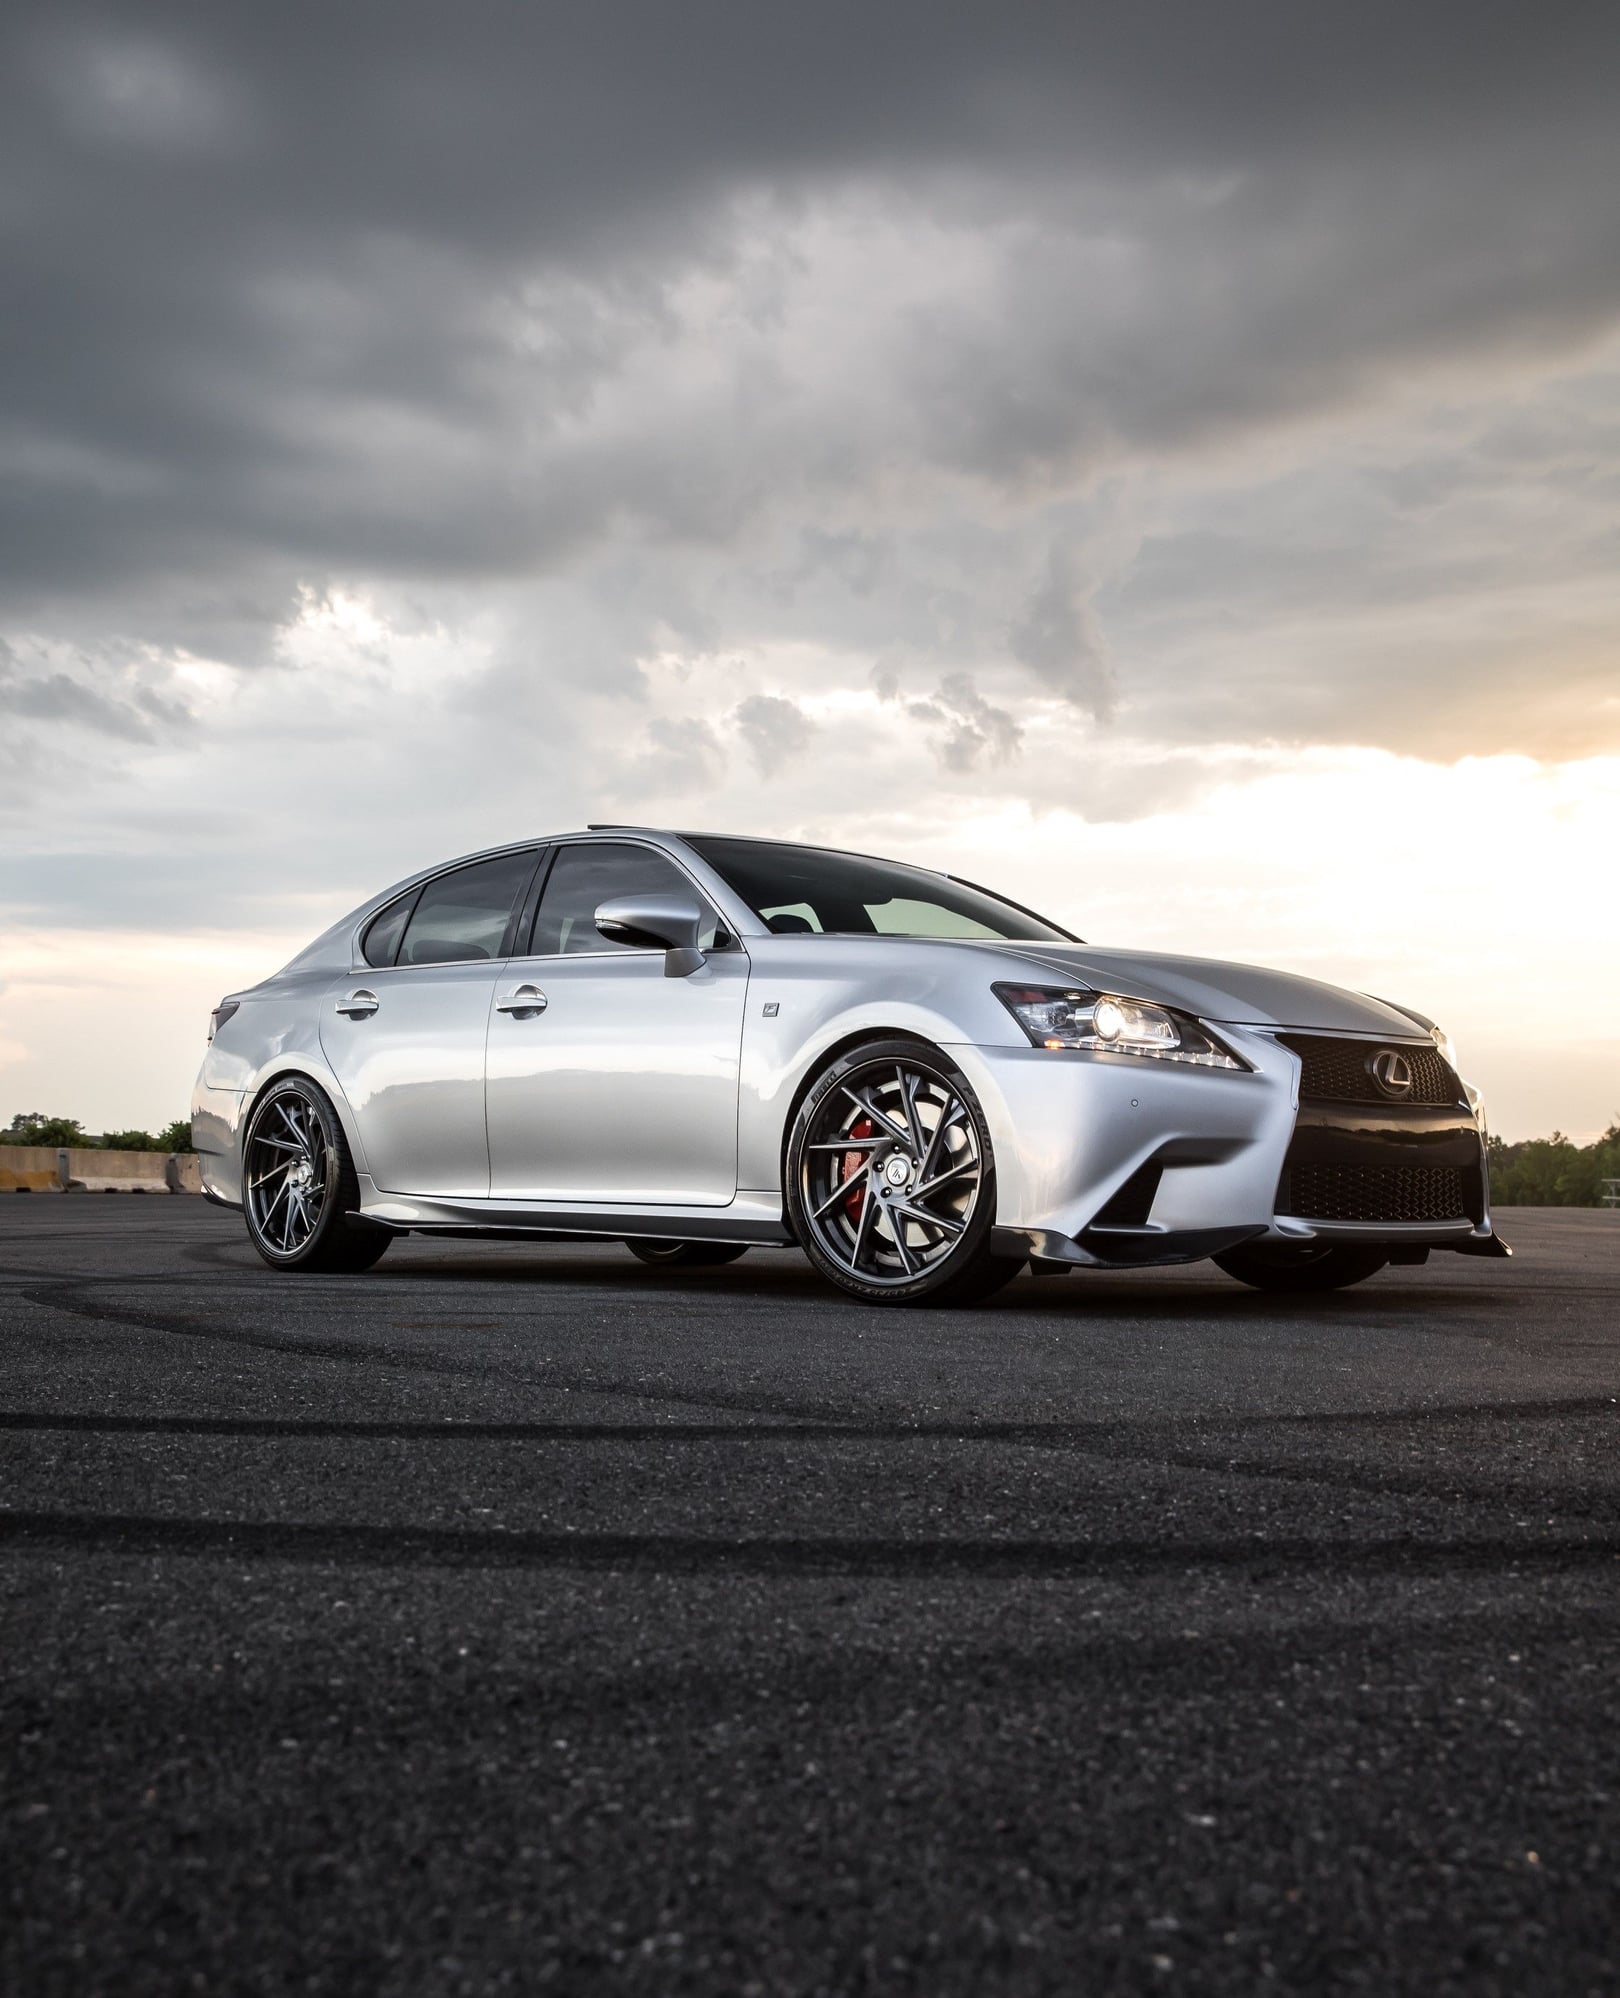 2014 Lexus GS350 - For sale: 2014 Lexus GS350 F Sport with $10k worth of mods - Used - VIN JTHBE1BL7E5043718 - 91,000 Miles - 6 cyl - 2WD - Automatic - Sedan - Silver - Charlotte, NC 28277, United States